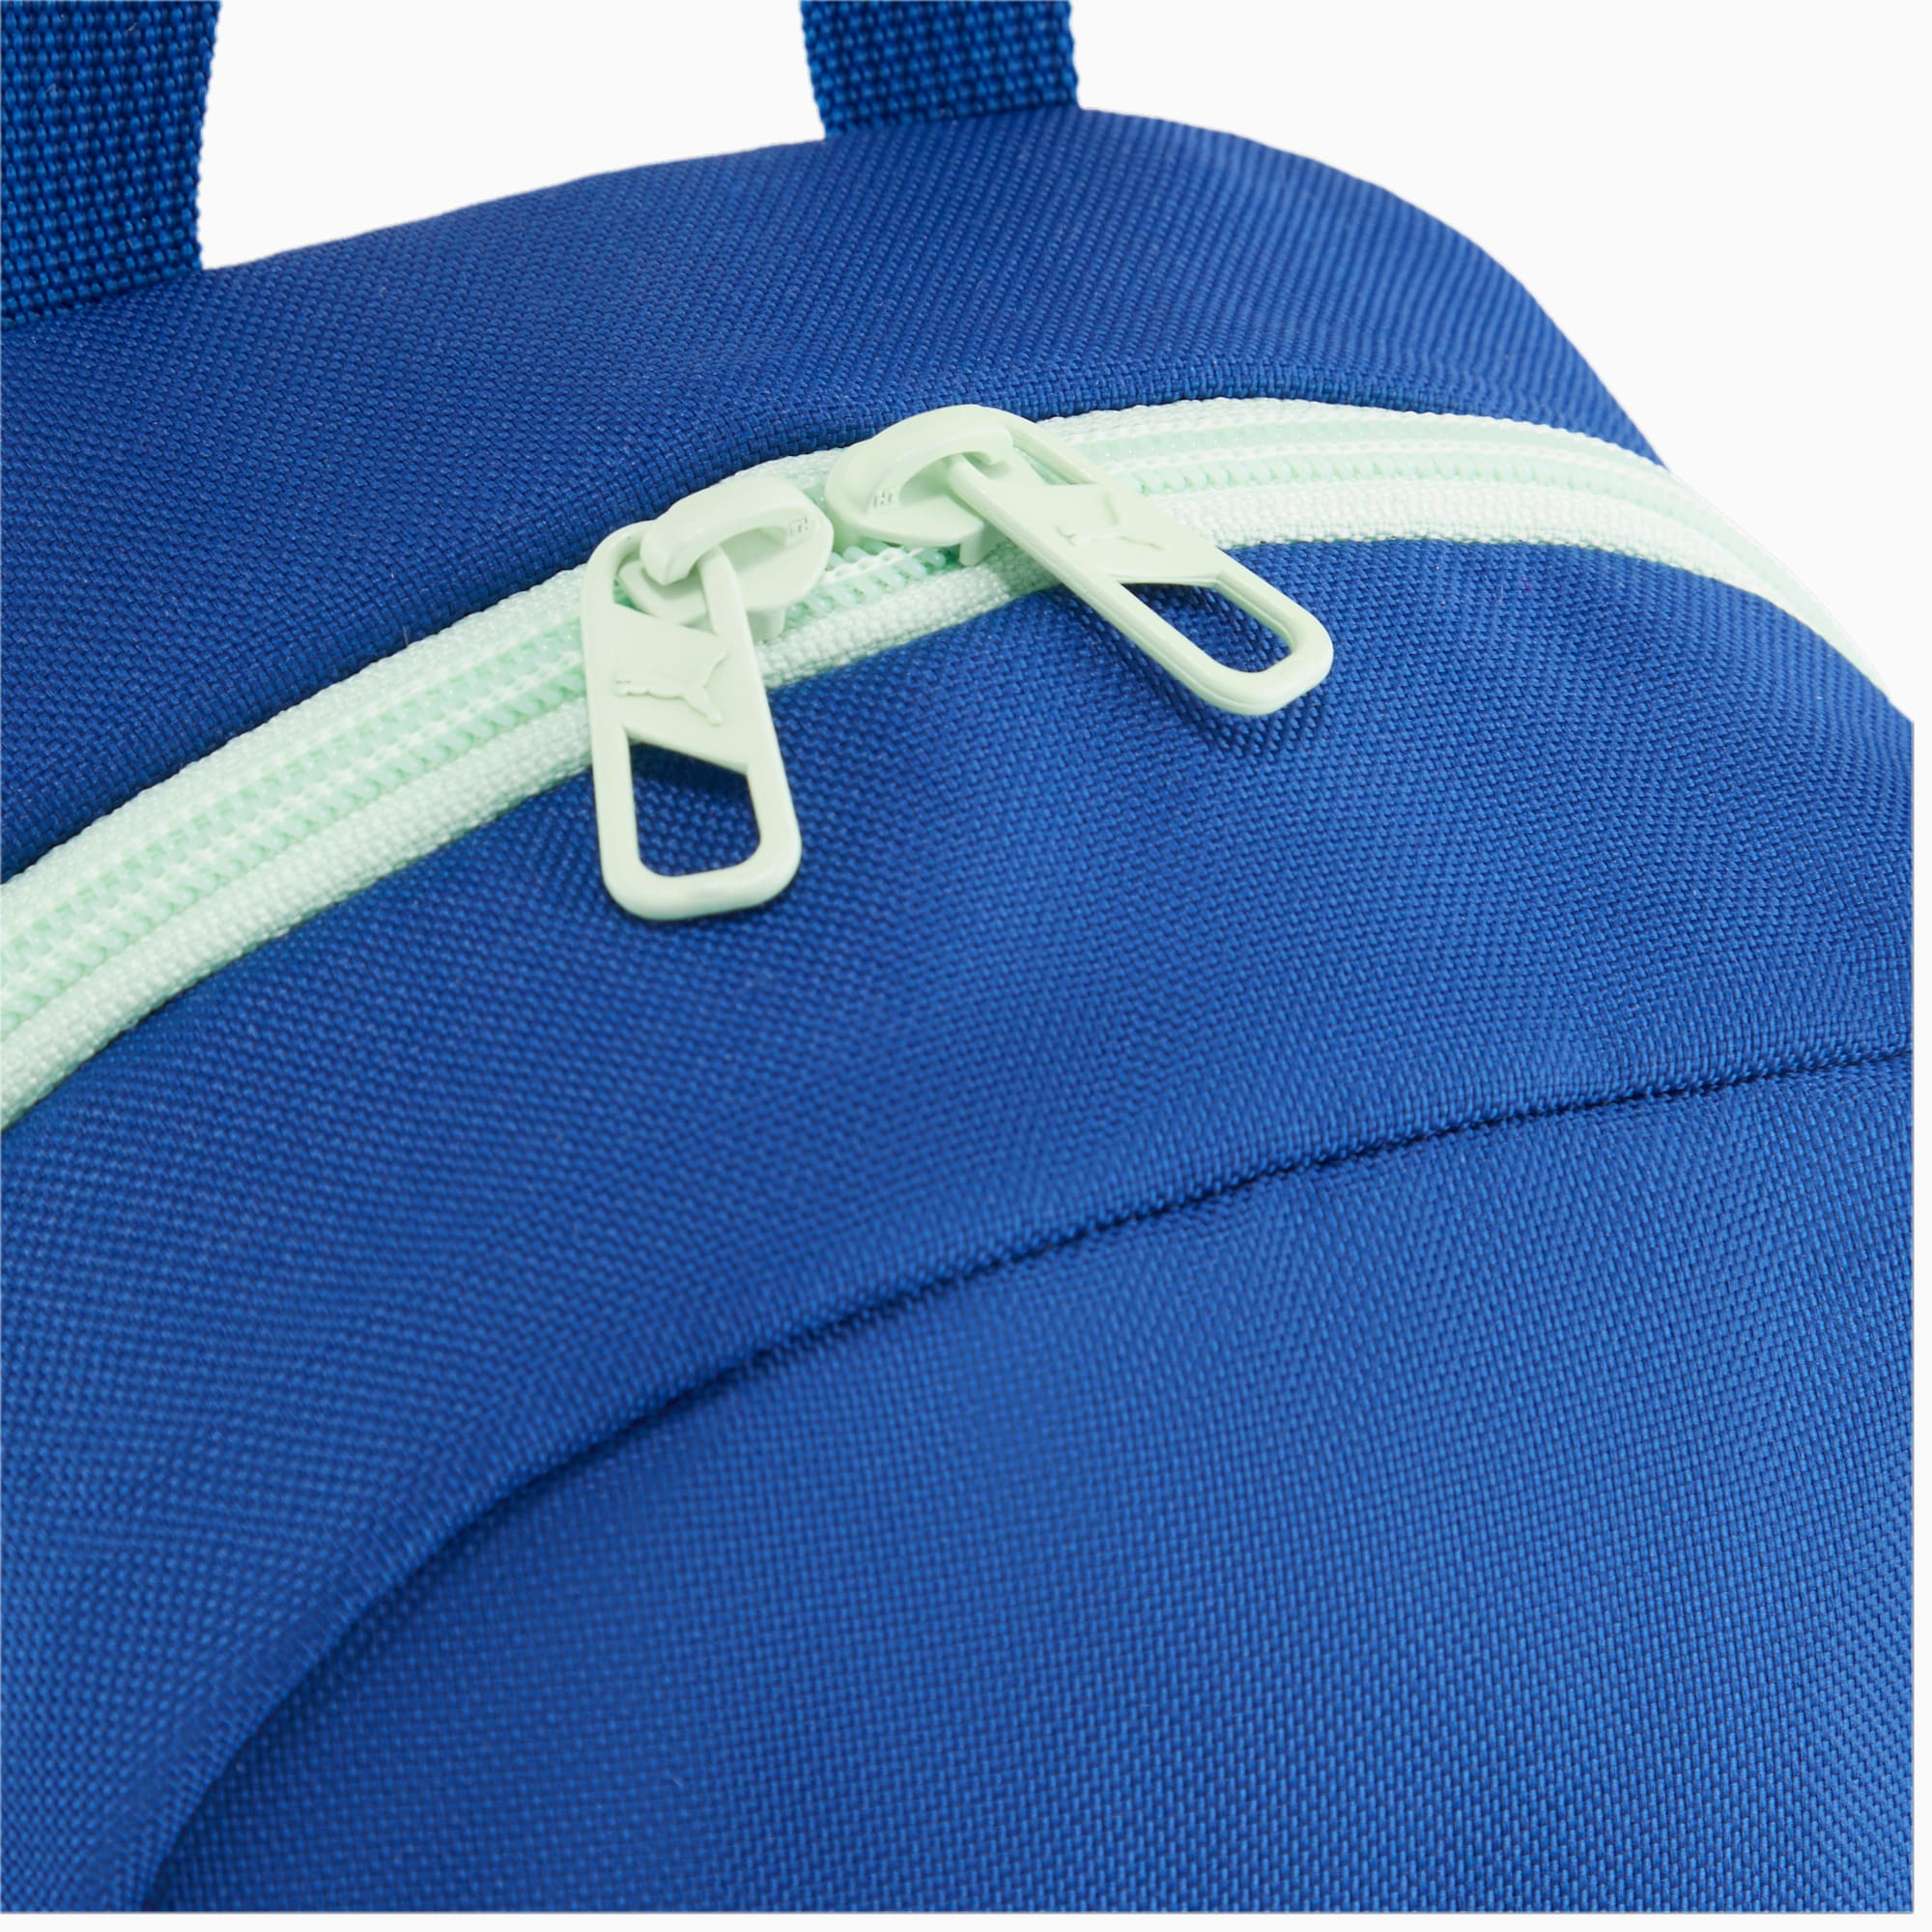 PUMA Phase Small Backpack, Cobalt Glaze, Accessories